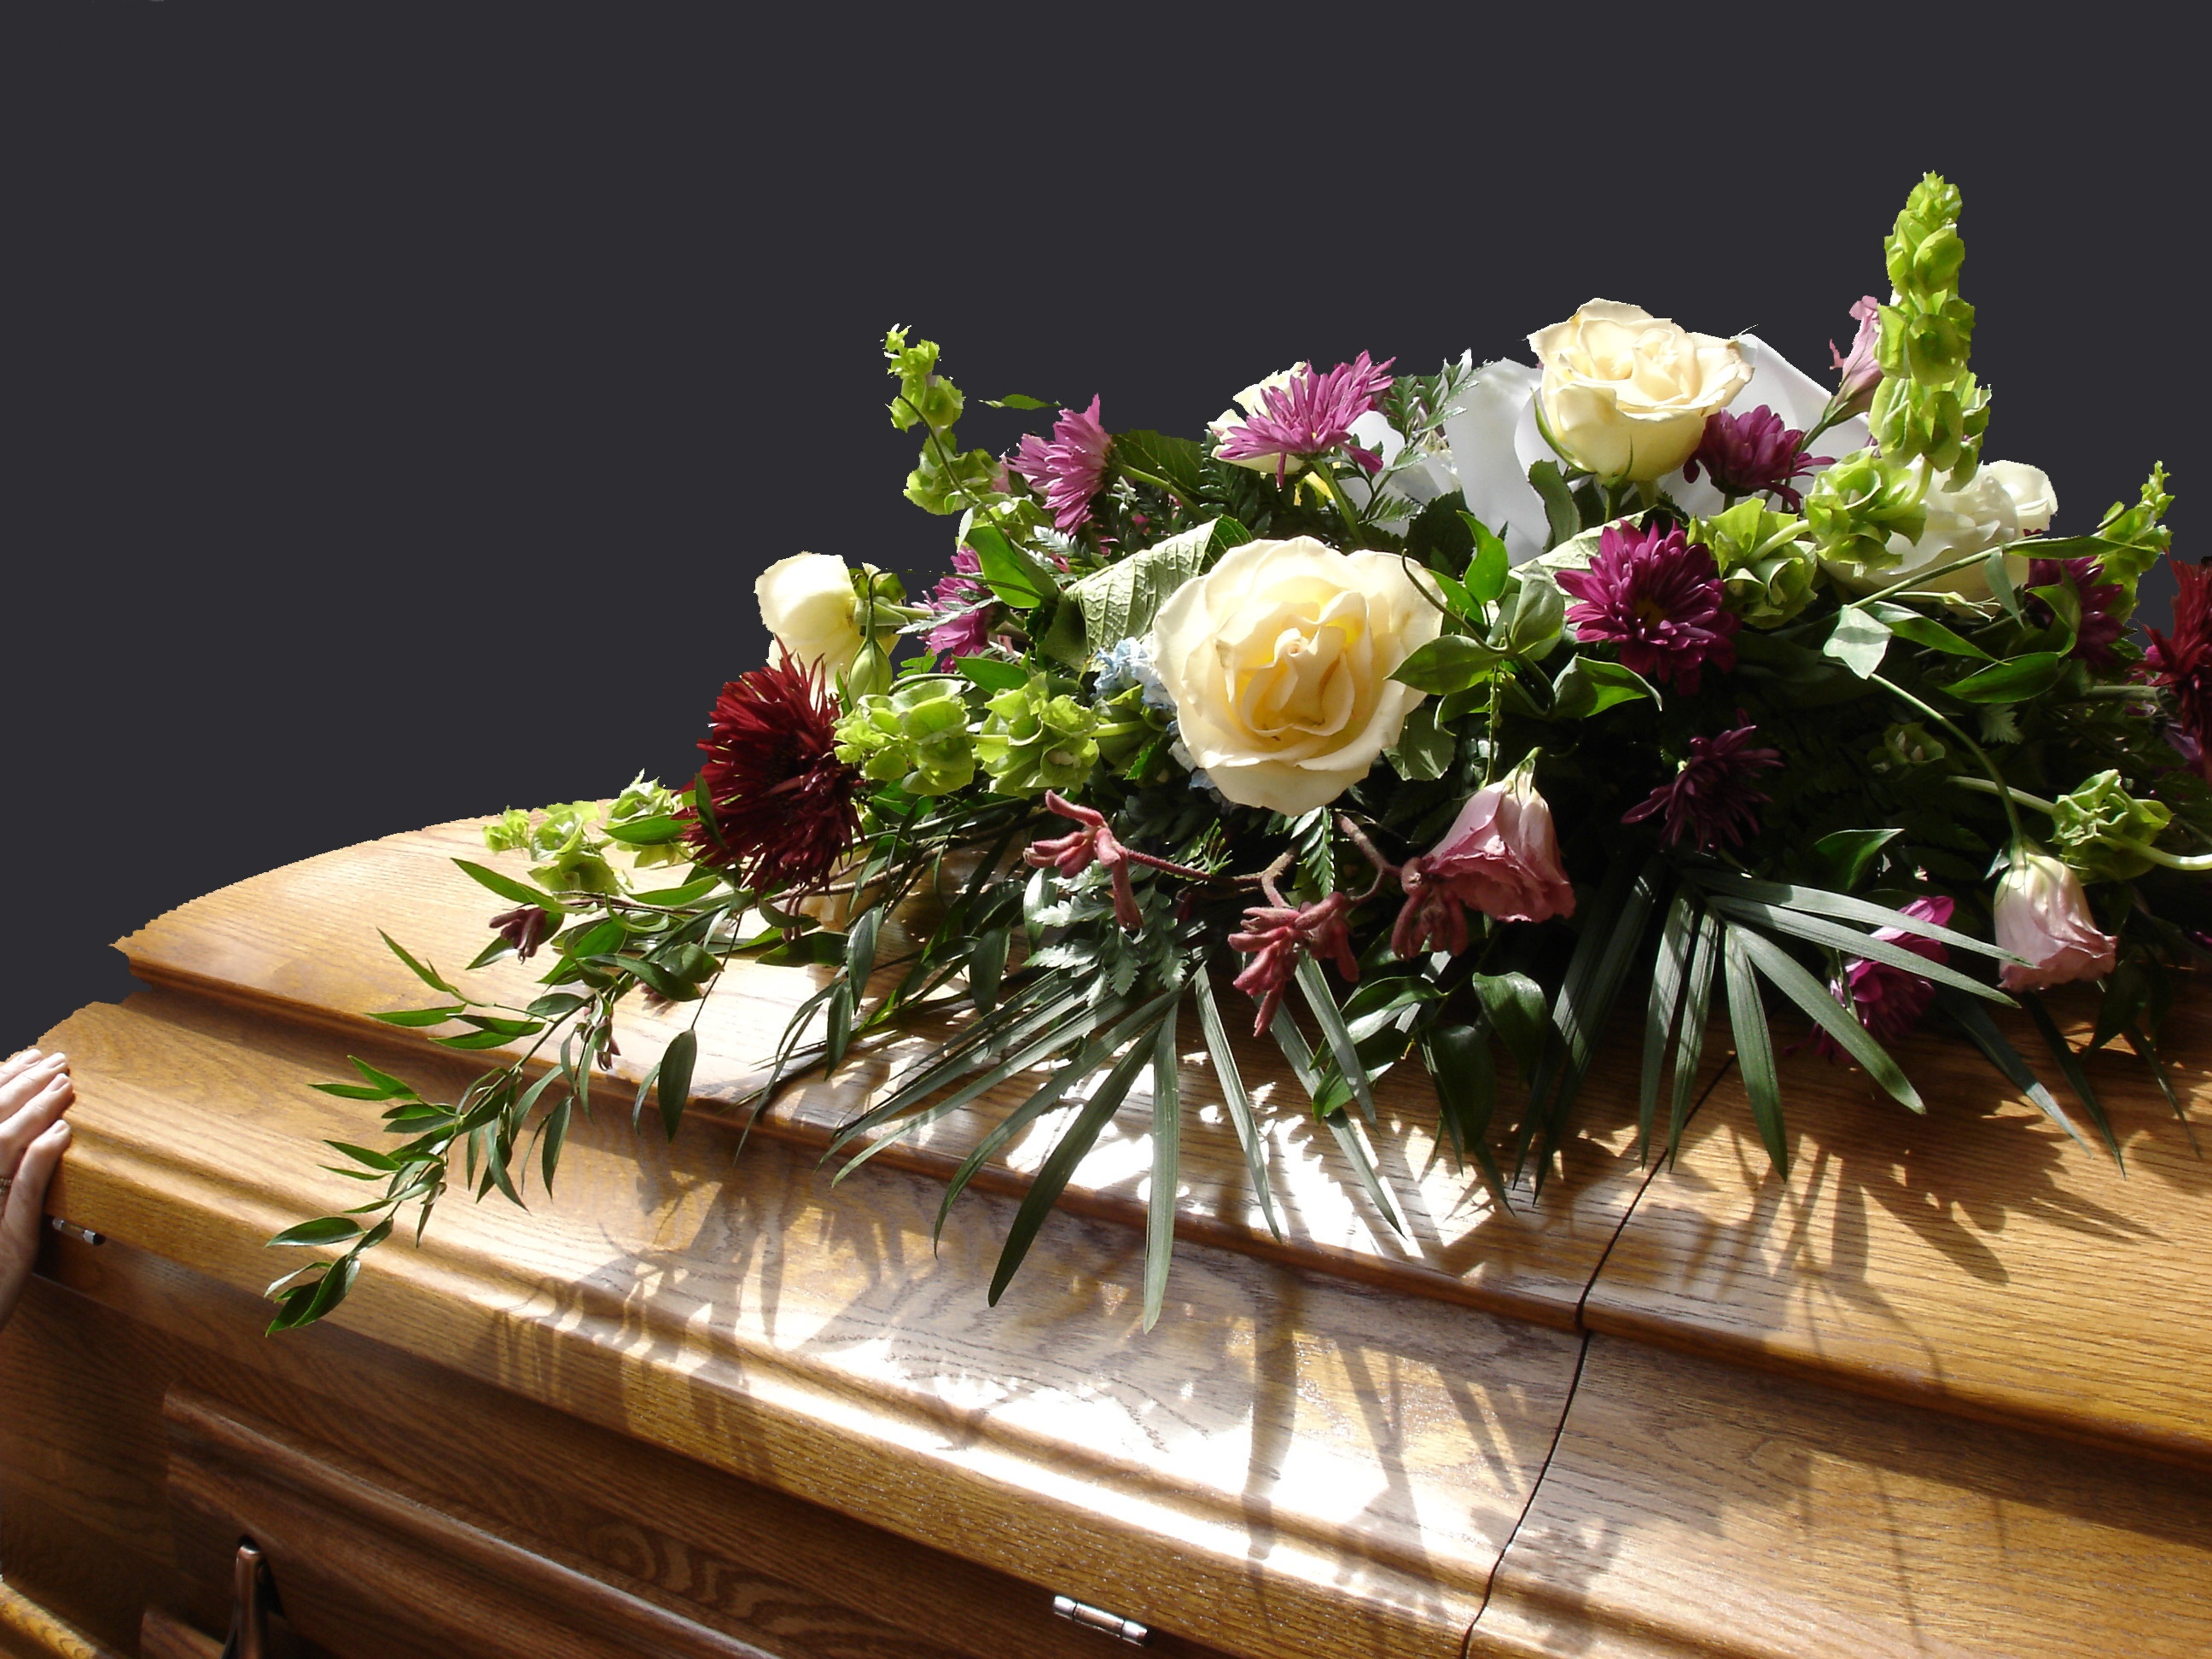 Coffin with Flowers